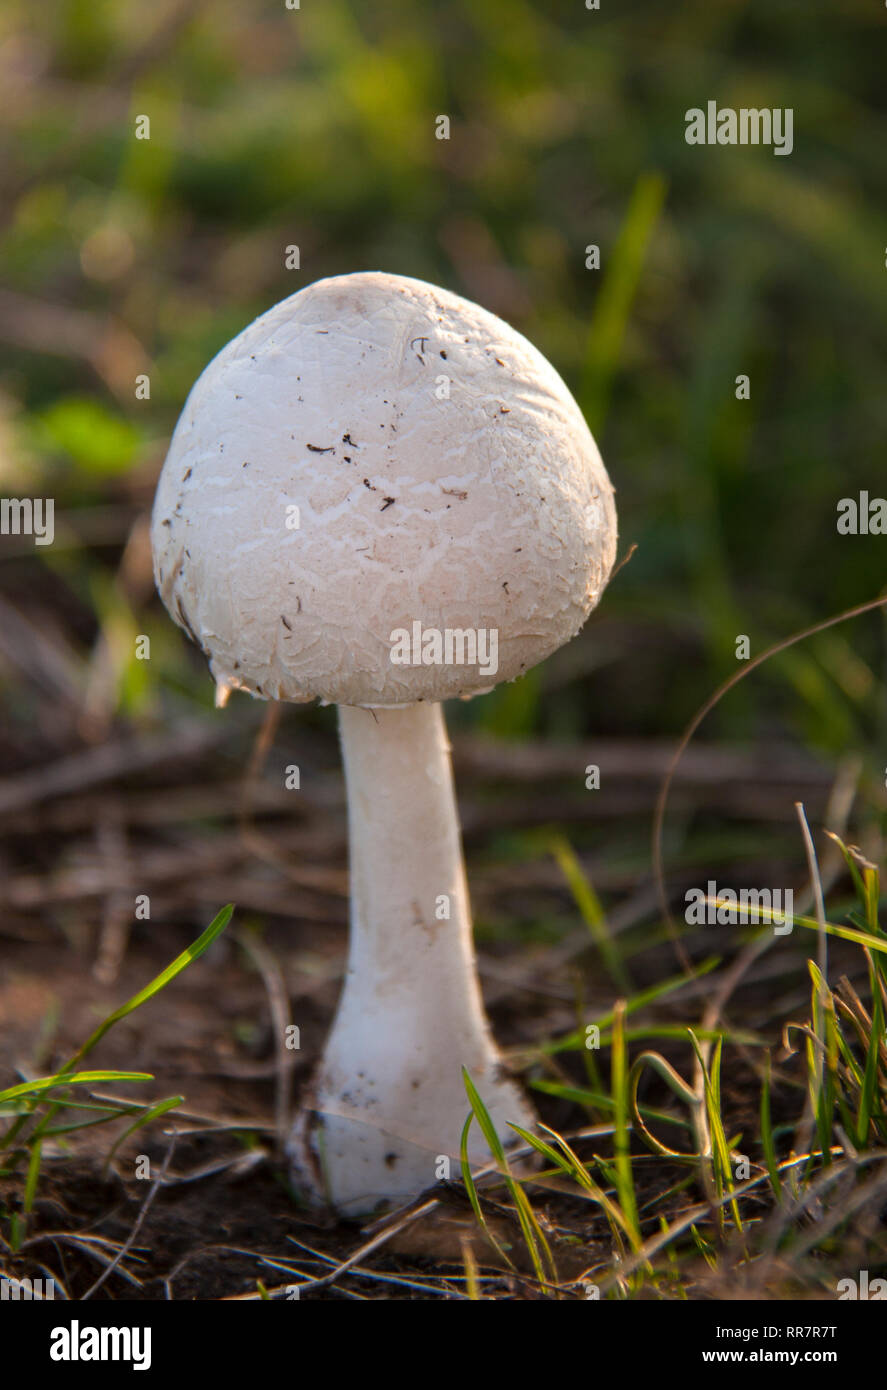 Amanita phalloides or death cap in the forest Stock Photo